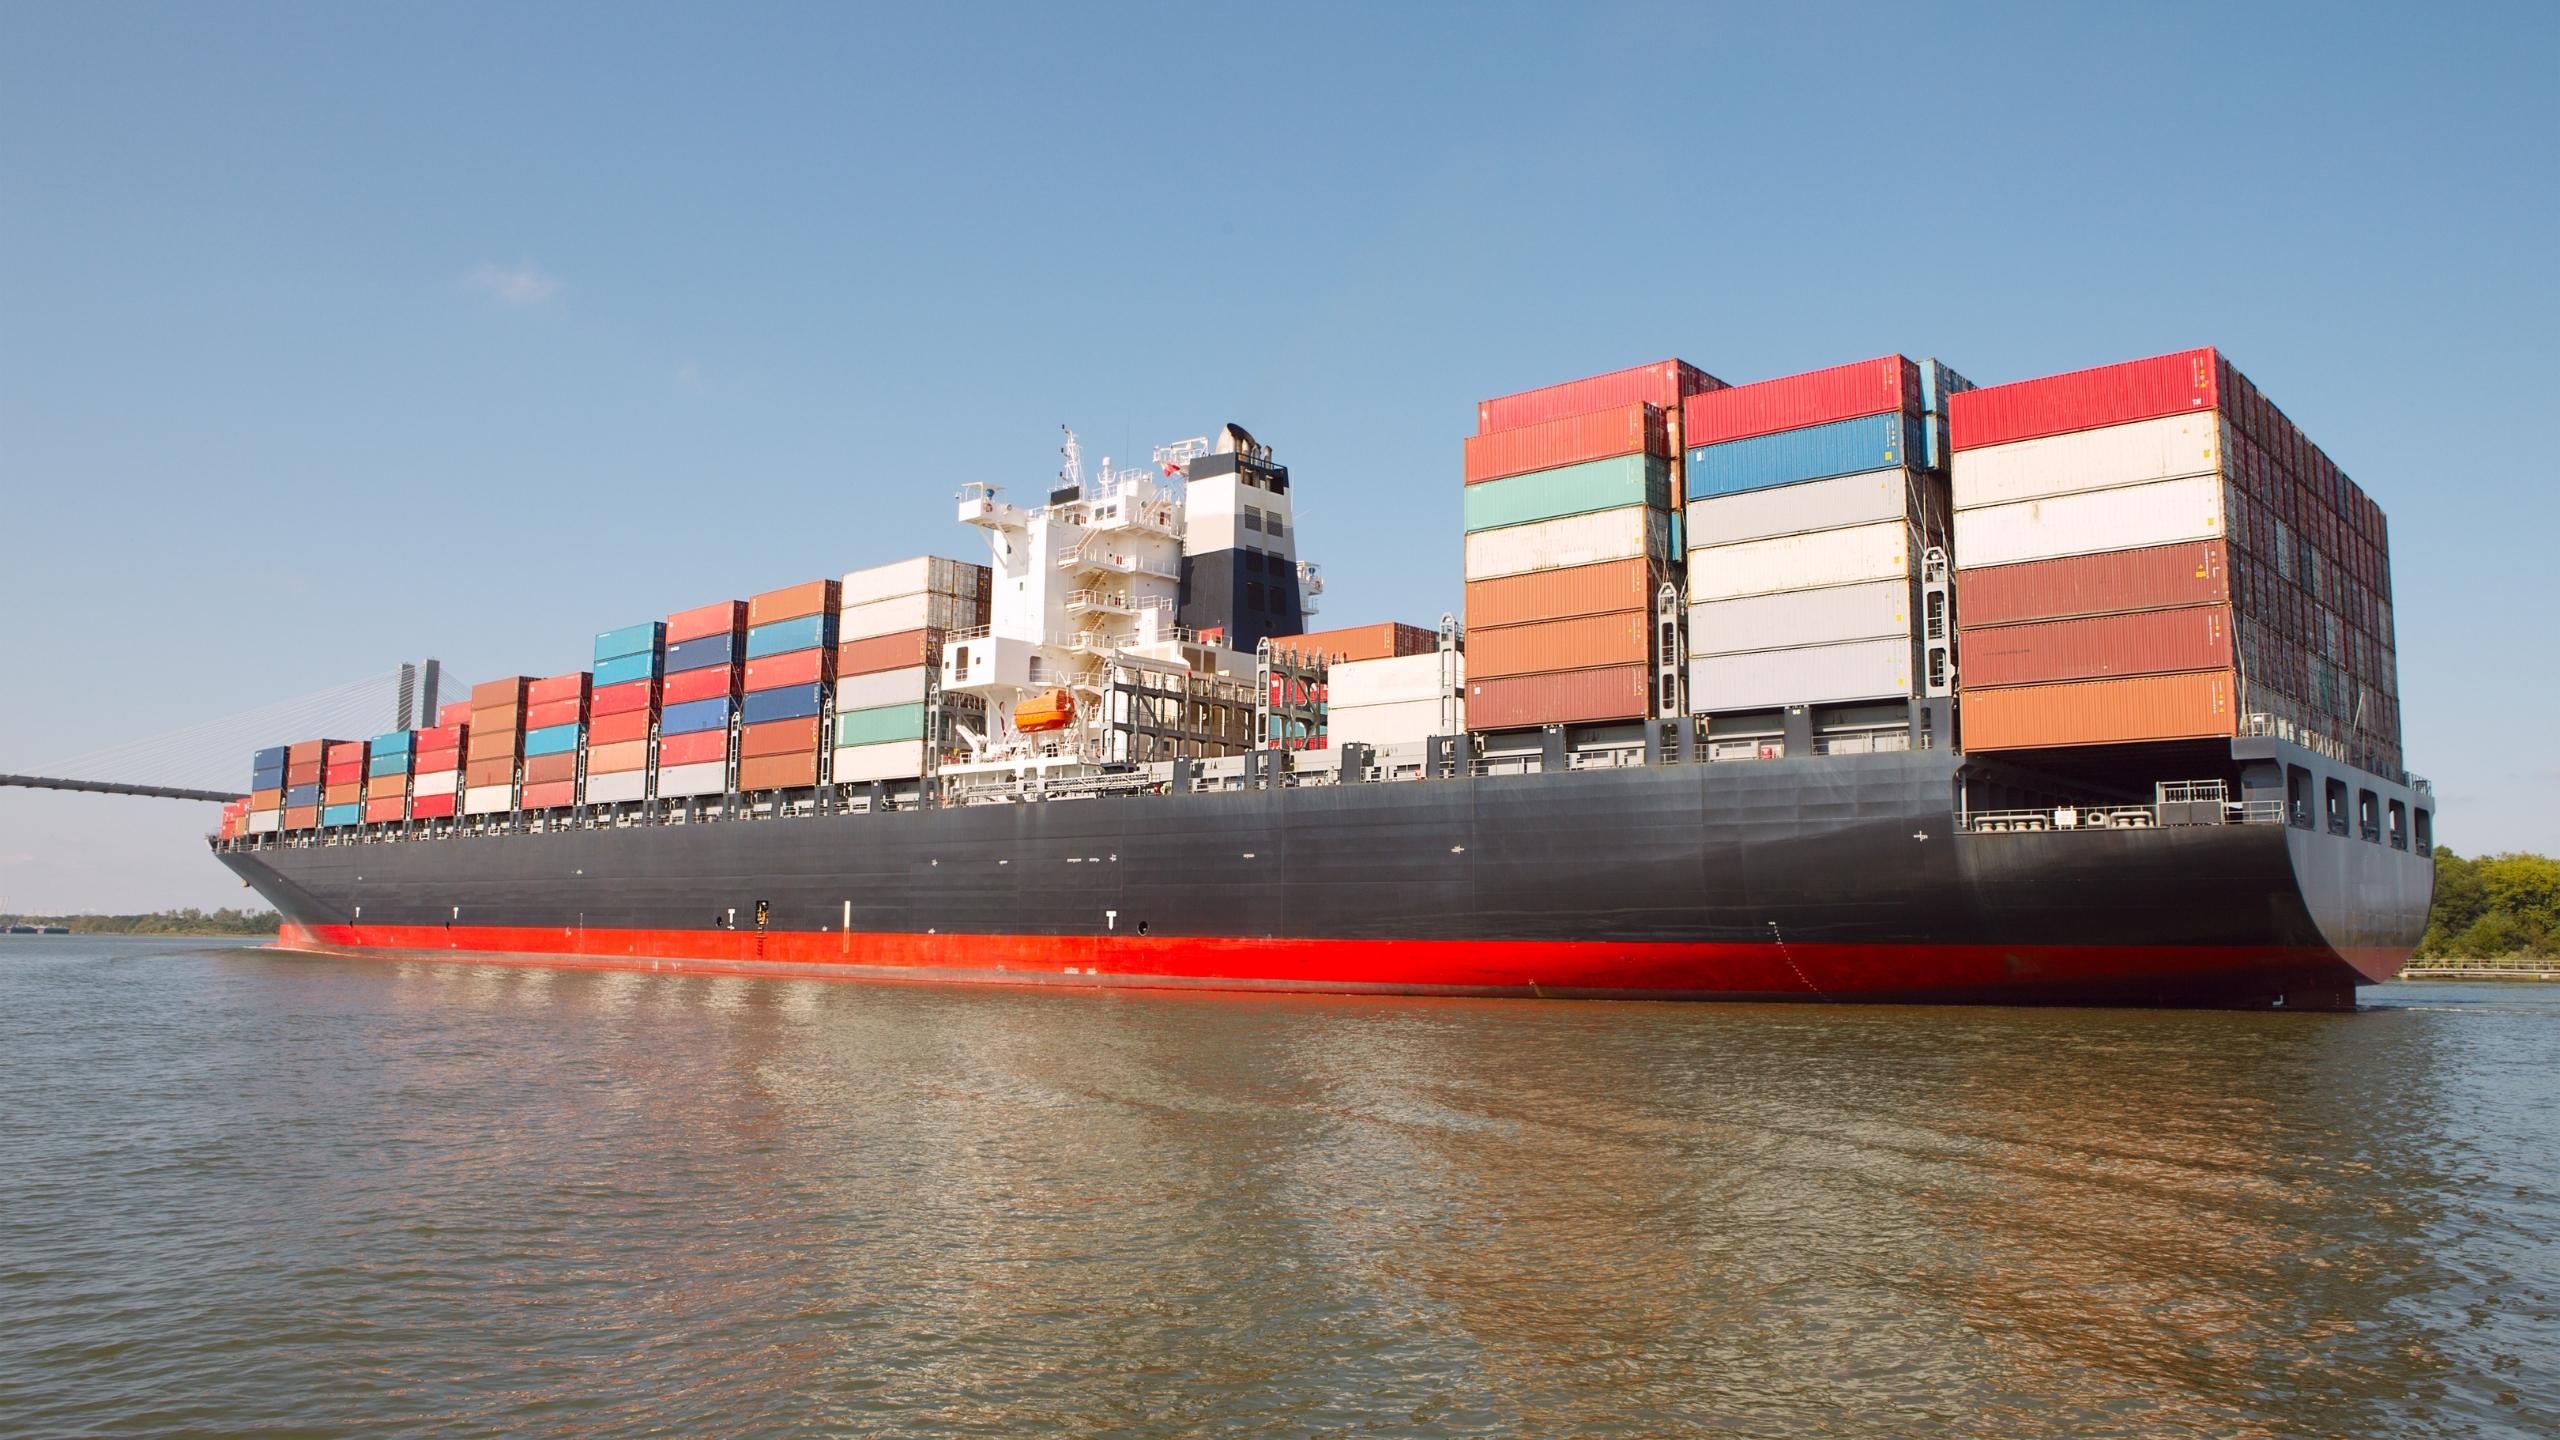 Ammonia is being investigated as a source of fuel to decarbonise heavy marine freight vessels